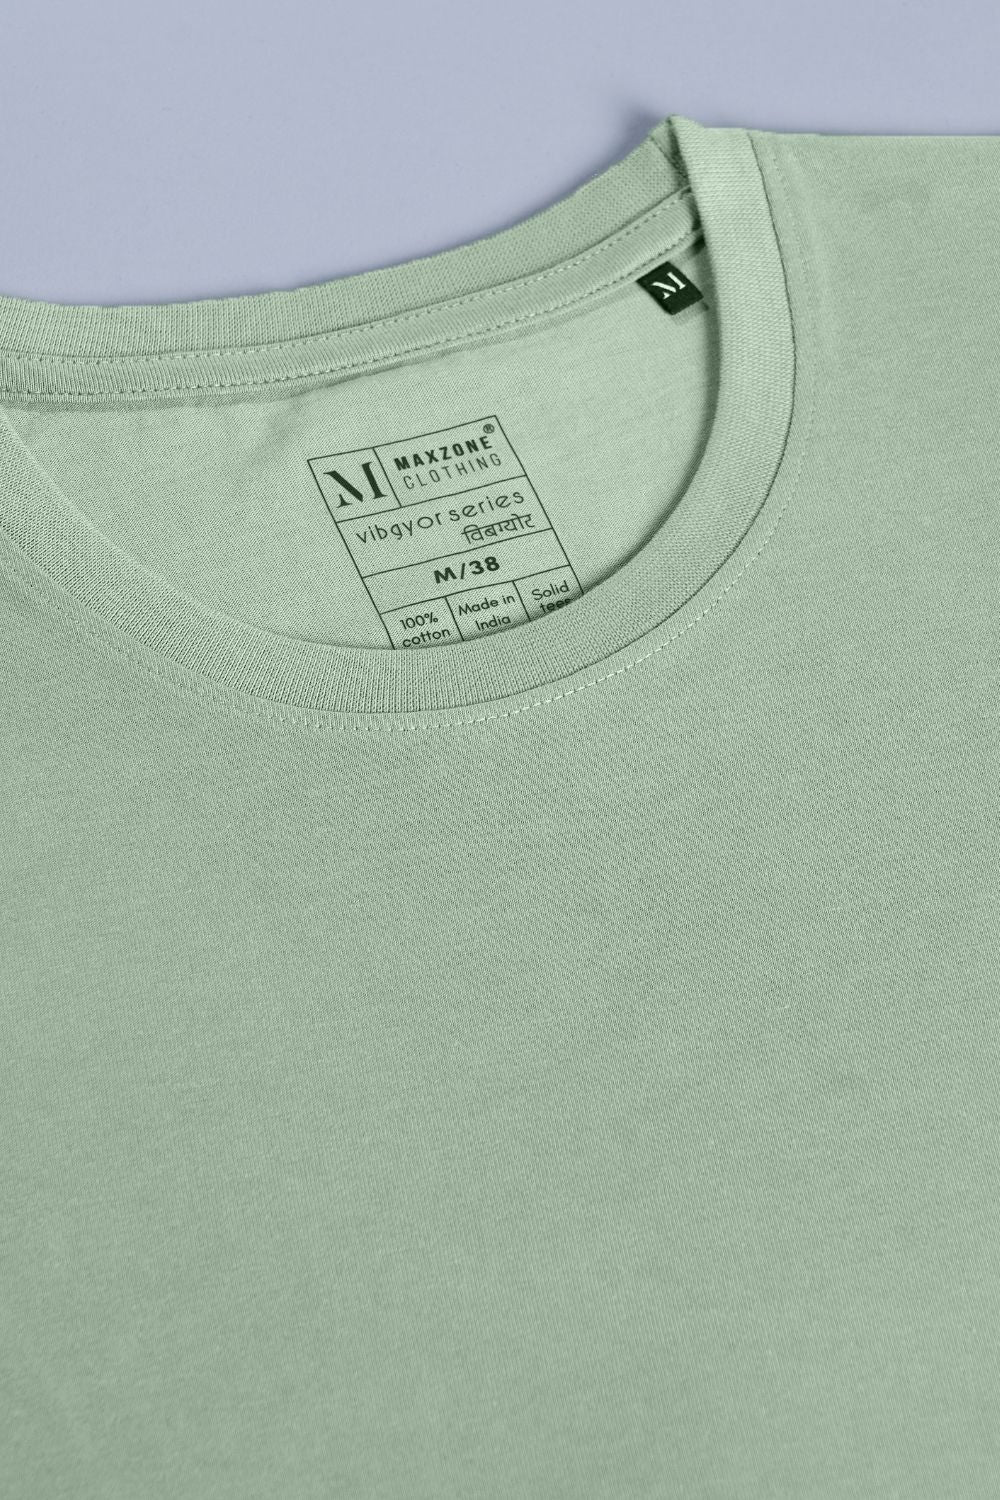 Green colored, cotton Graphic T shirt for men with half sleeves and round neck, product close up.